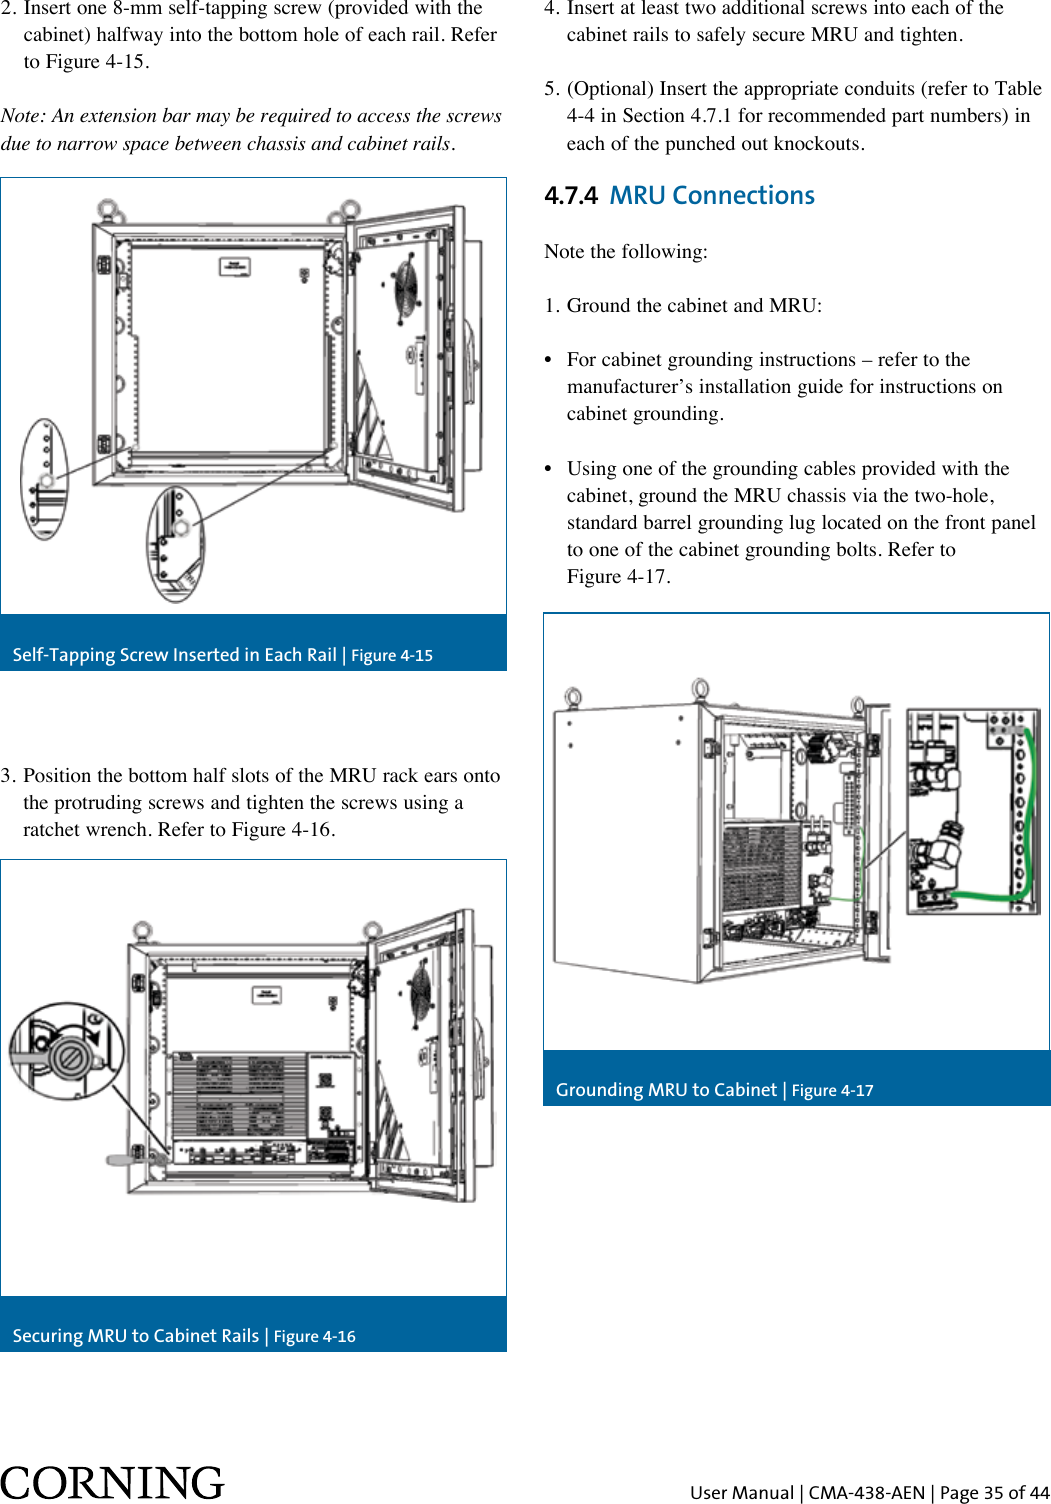 User Manual | CMA-438-AEN | Page 35 of 44Self-Tapping Screw Inserted in Each Rail | Figure 4-15Grounding MRU to Cabinet | Figure 4-17Securing MRU to Cabinet Rails | Figure 4-163.  Position the bottom half slots of the MRU rack ears onto the protruding screws and tighten the screws using a ratchet wrench. Refer to Figure 4-16.4. Insert at least two additional screws into each of the    cabinet rails to safely secure MRU and tighten.5.  (Optional) Insert the appropriate conduits (refer to Table 4-4 in Section 4.7.1 for recommended part numbers) in each of the punched out knockouts.4.7.4  MRU ConnectionsNote the following:1. Ground the cabinet and MRU:•  For cabinet grounding instructions – refer to the    manufacturer’s installation guide for instructions on    cabinet grounding.•  Using one of the grounding cables provided with the    cabinet, ground the MRU chassis via the two-hole,    standard barrel grounding lug located on the front panel    to one of the cabinet grounding bolts. Refer to    Figure 4-17.2.  Insert one 8-mm self-tapping screw (provided with the cabinet) halfway into the bottom hole of each rail. Refer to Figure 4-15.Note: An extension bar may be required to access the screws due to narrow space between chassis and cabinet rails.